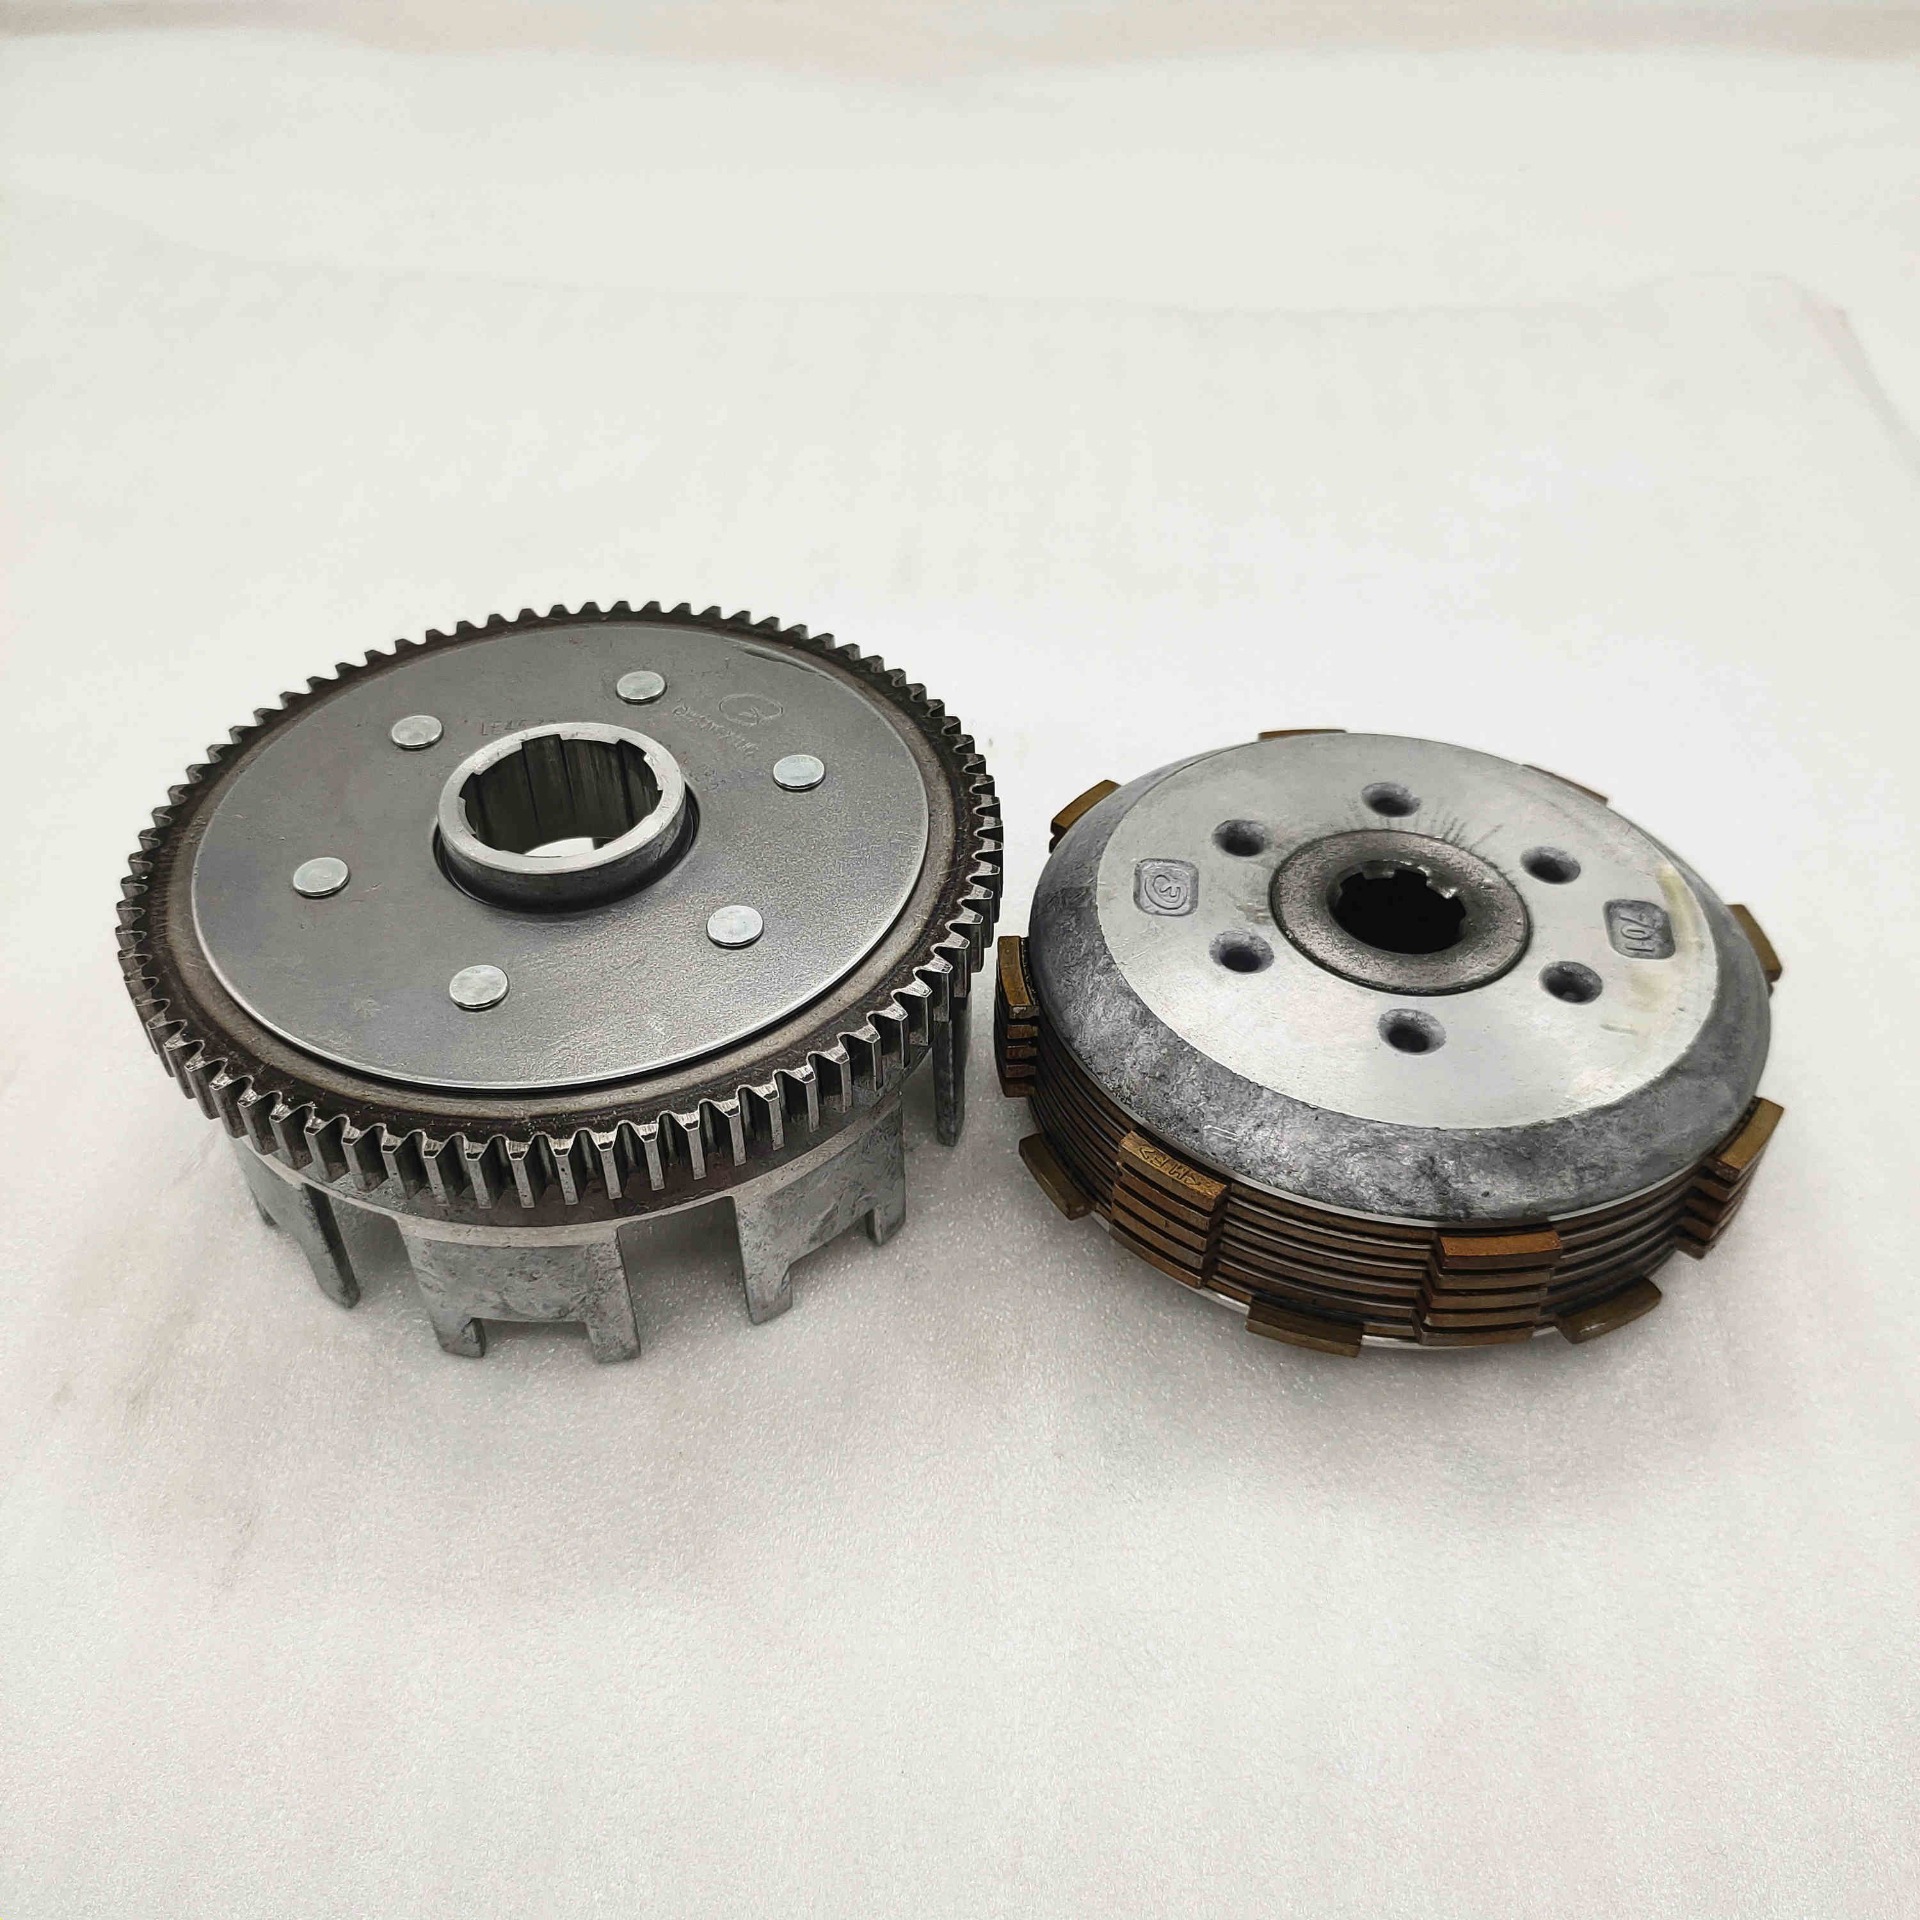 Engine Spare Parts Clutch Assembly